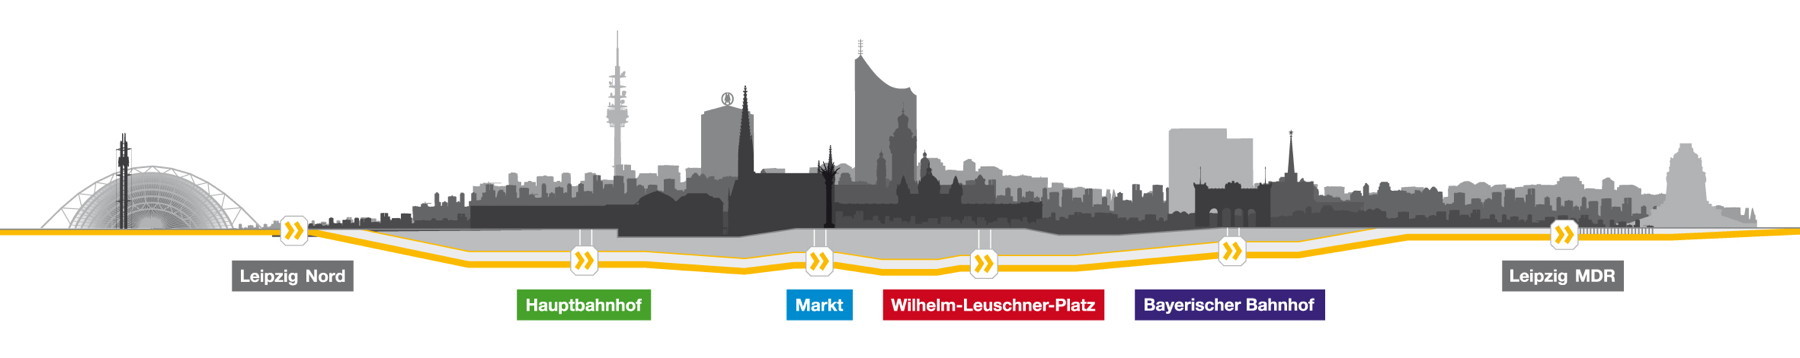 Three kilometers in length, the city tunnel connects Leipzig&rsquo;s two mayor terminals, Hauptbahnhof and Bayrischer Bahnhof, in a straight line under the historic city centre. (Infographic &copy; Freistaat Sachsen)